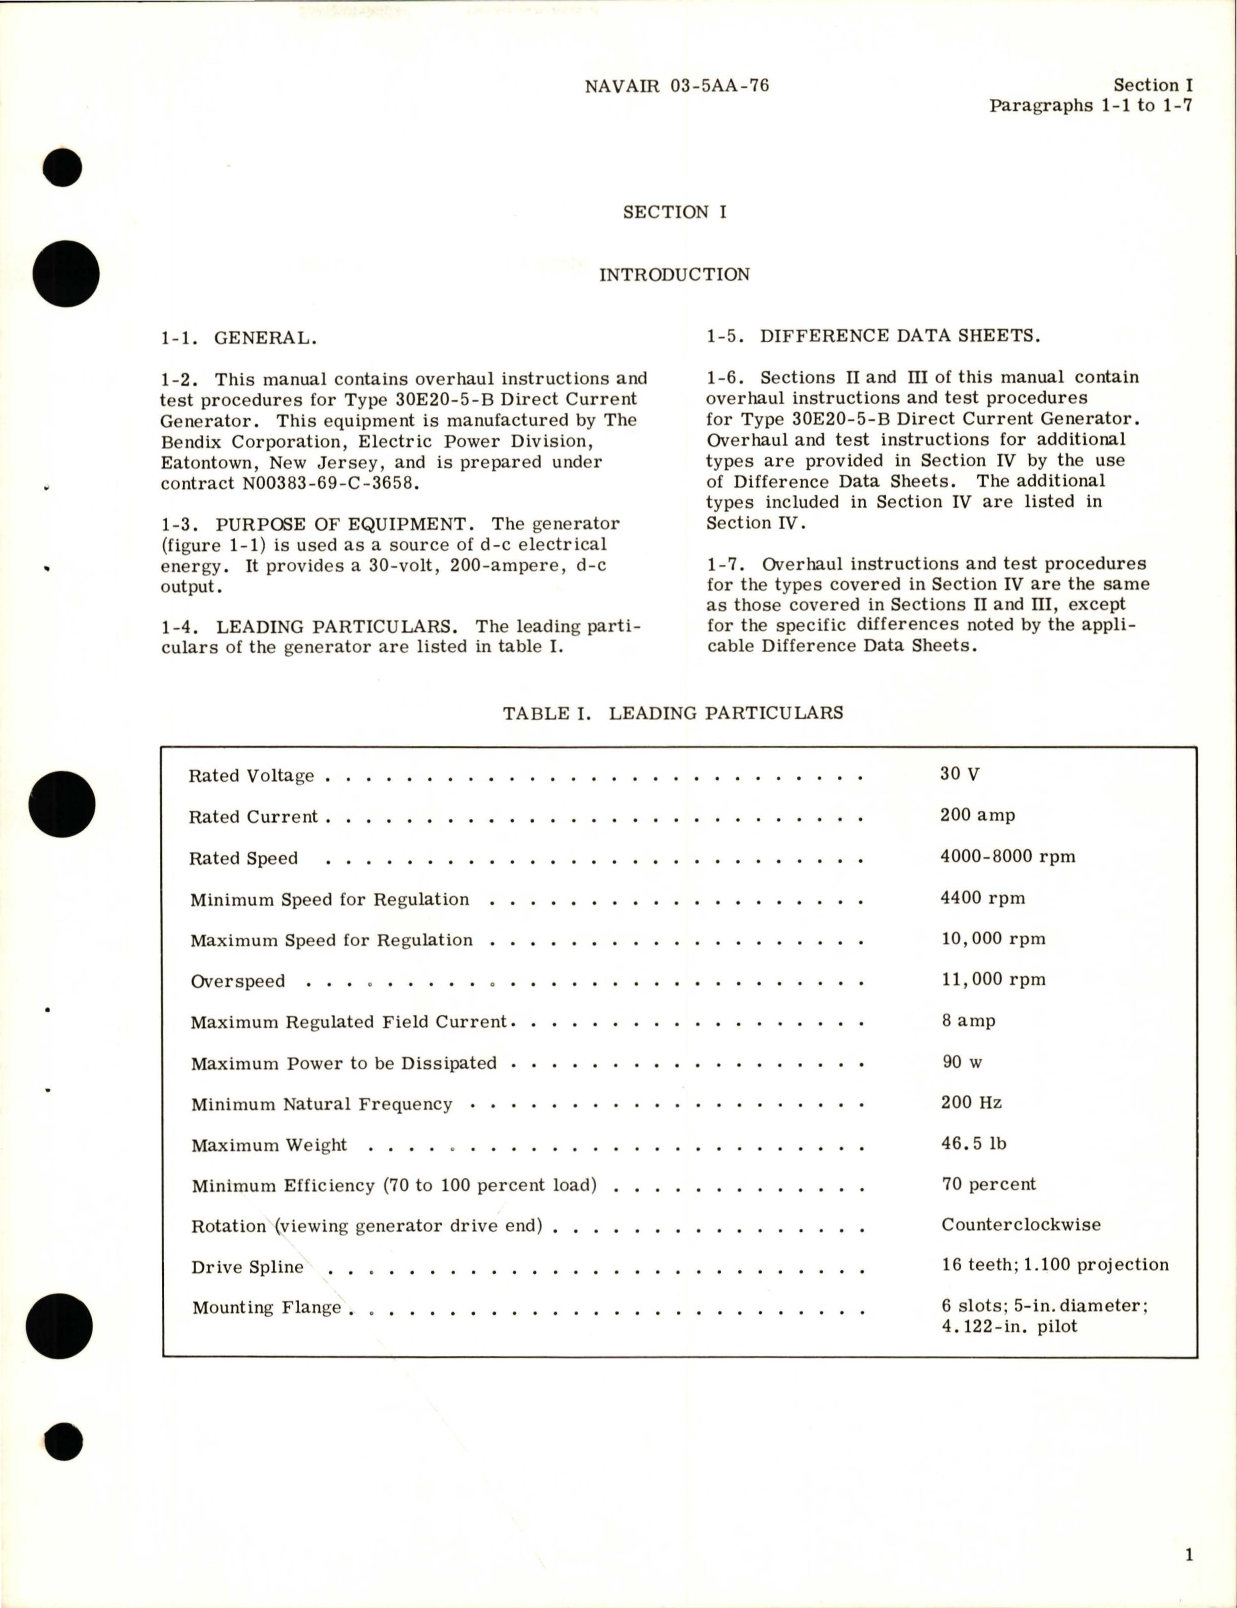 Sample page 5 from AirCorps Library document: Overhaul Instructions for Direct Current Generator - Types 30E20-5-B, 30E20-11-B, 30E20-49-A